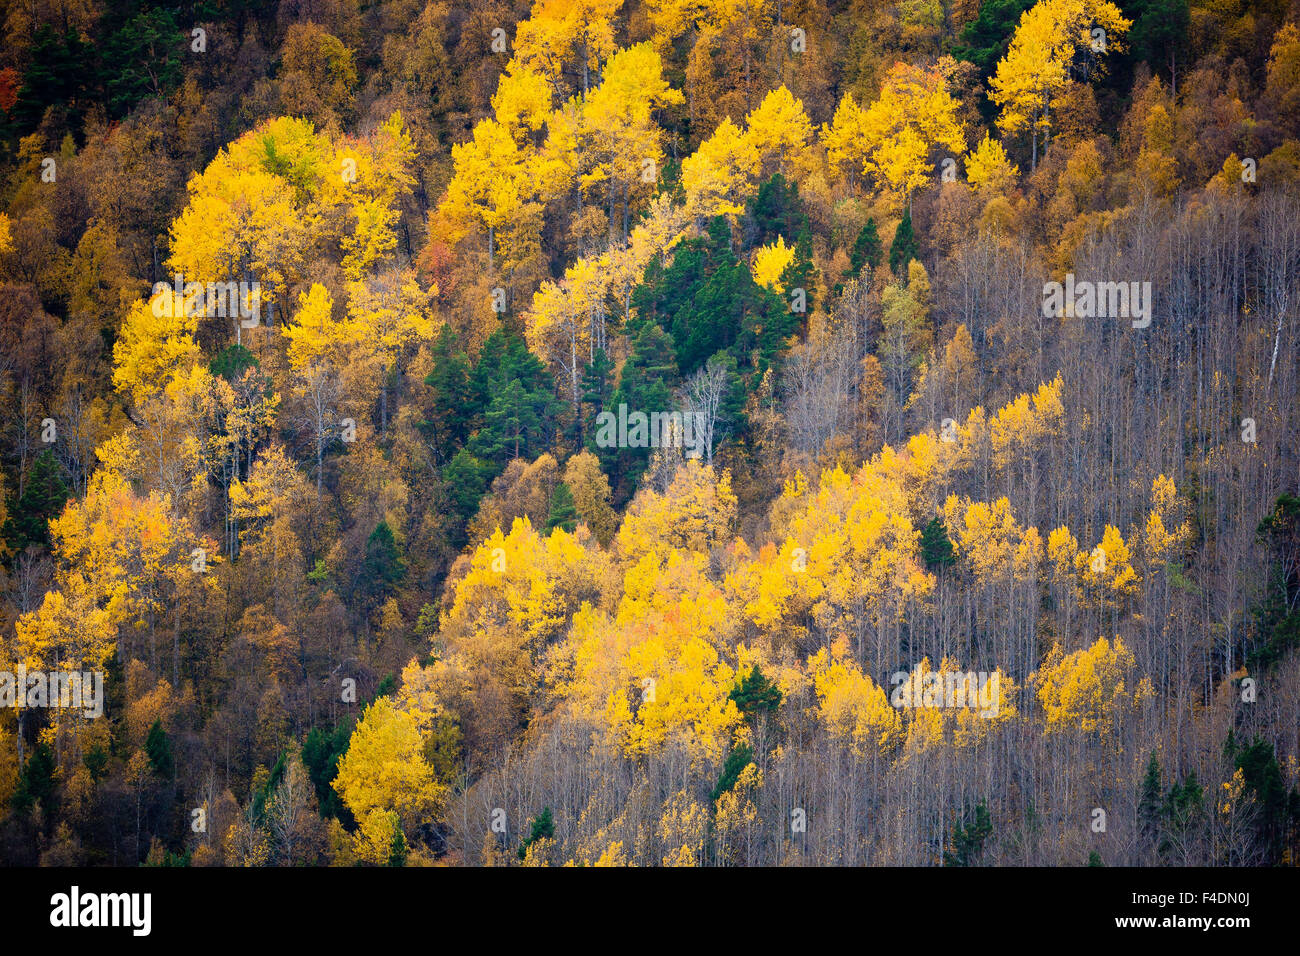 Fall colors in the hillside of Lieslia at Dombås, Dovre kommune, Oppland fylke, Norway. Stock Photo